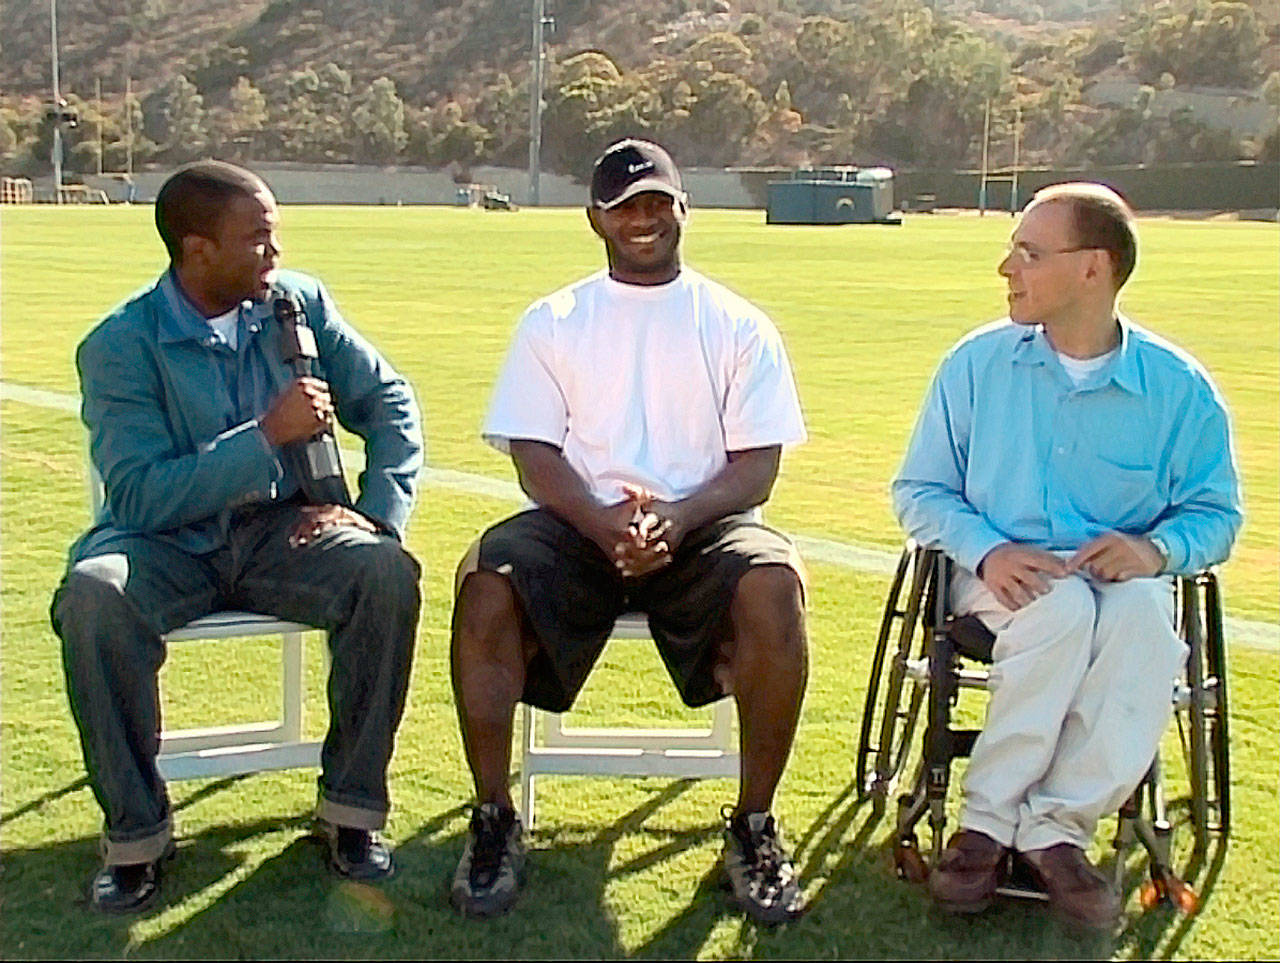 Hallstrom and Brown interviewing San Diego Chargers running back LaDainian Tomlinson (middle) in 2007. Tomlinson was the reigning MVP of the NFL that year. Courtesy of Thunder Sports Network.